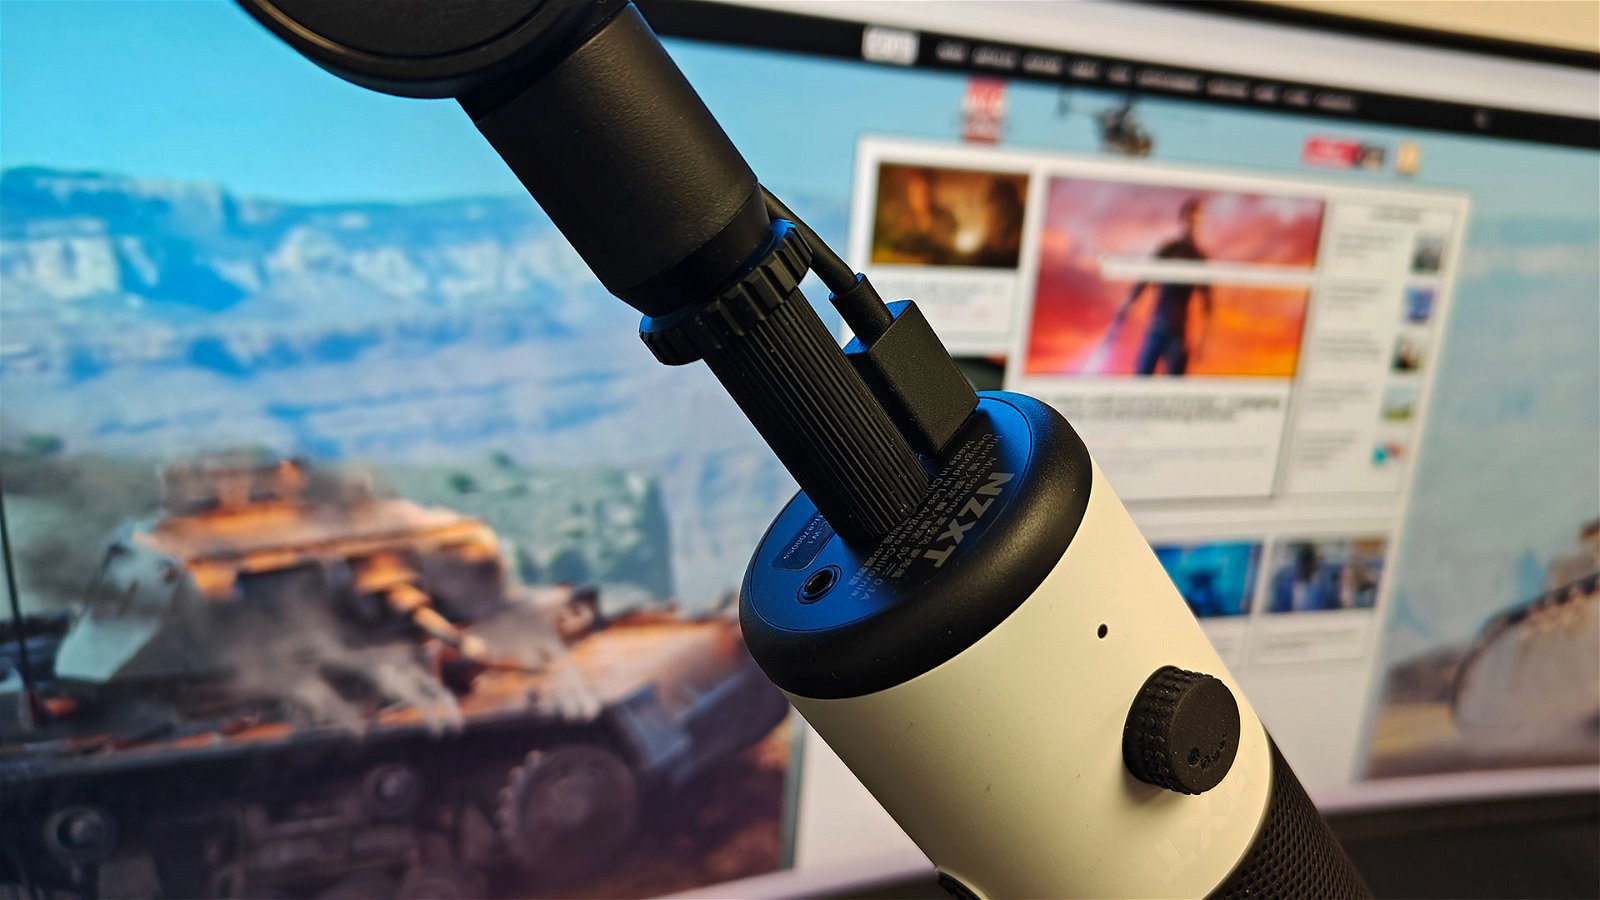 Nzxt Capsule Mini Microphone Review 23040304 3